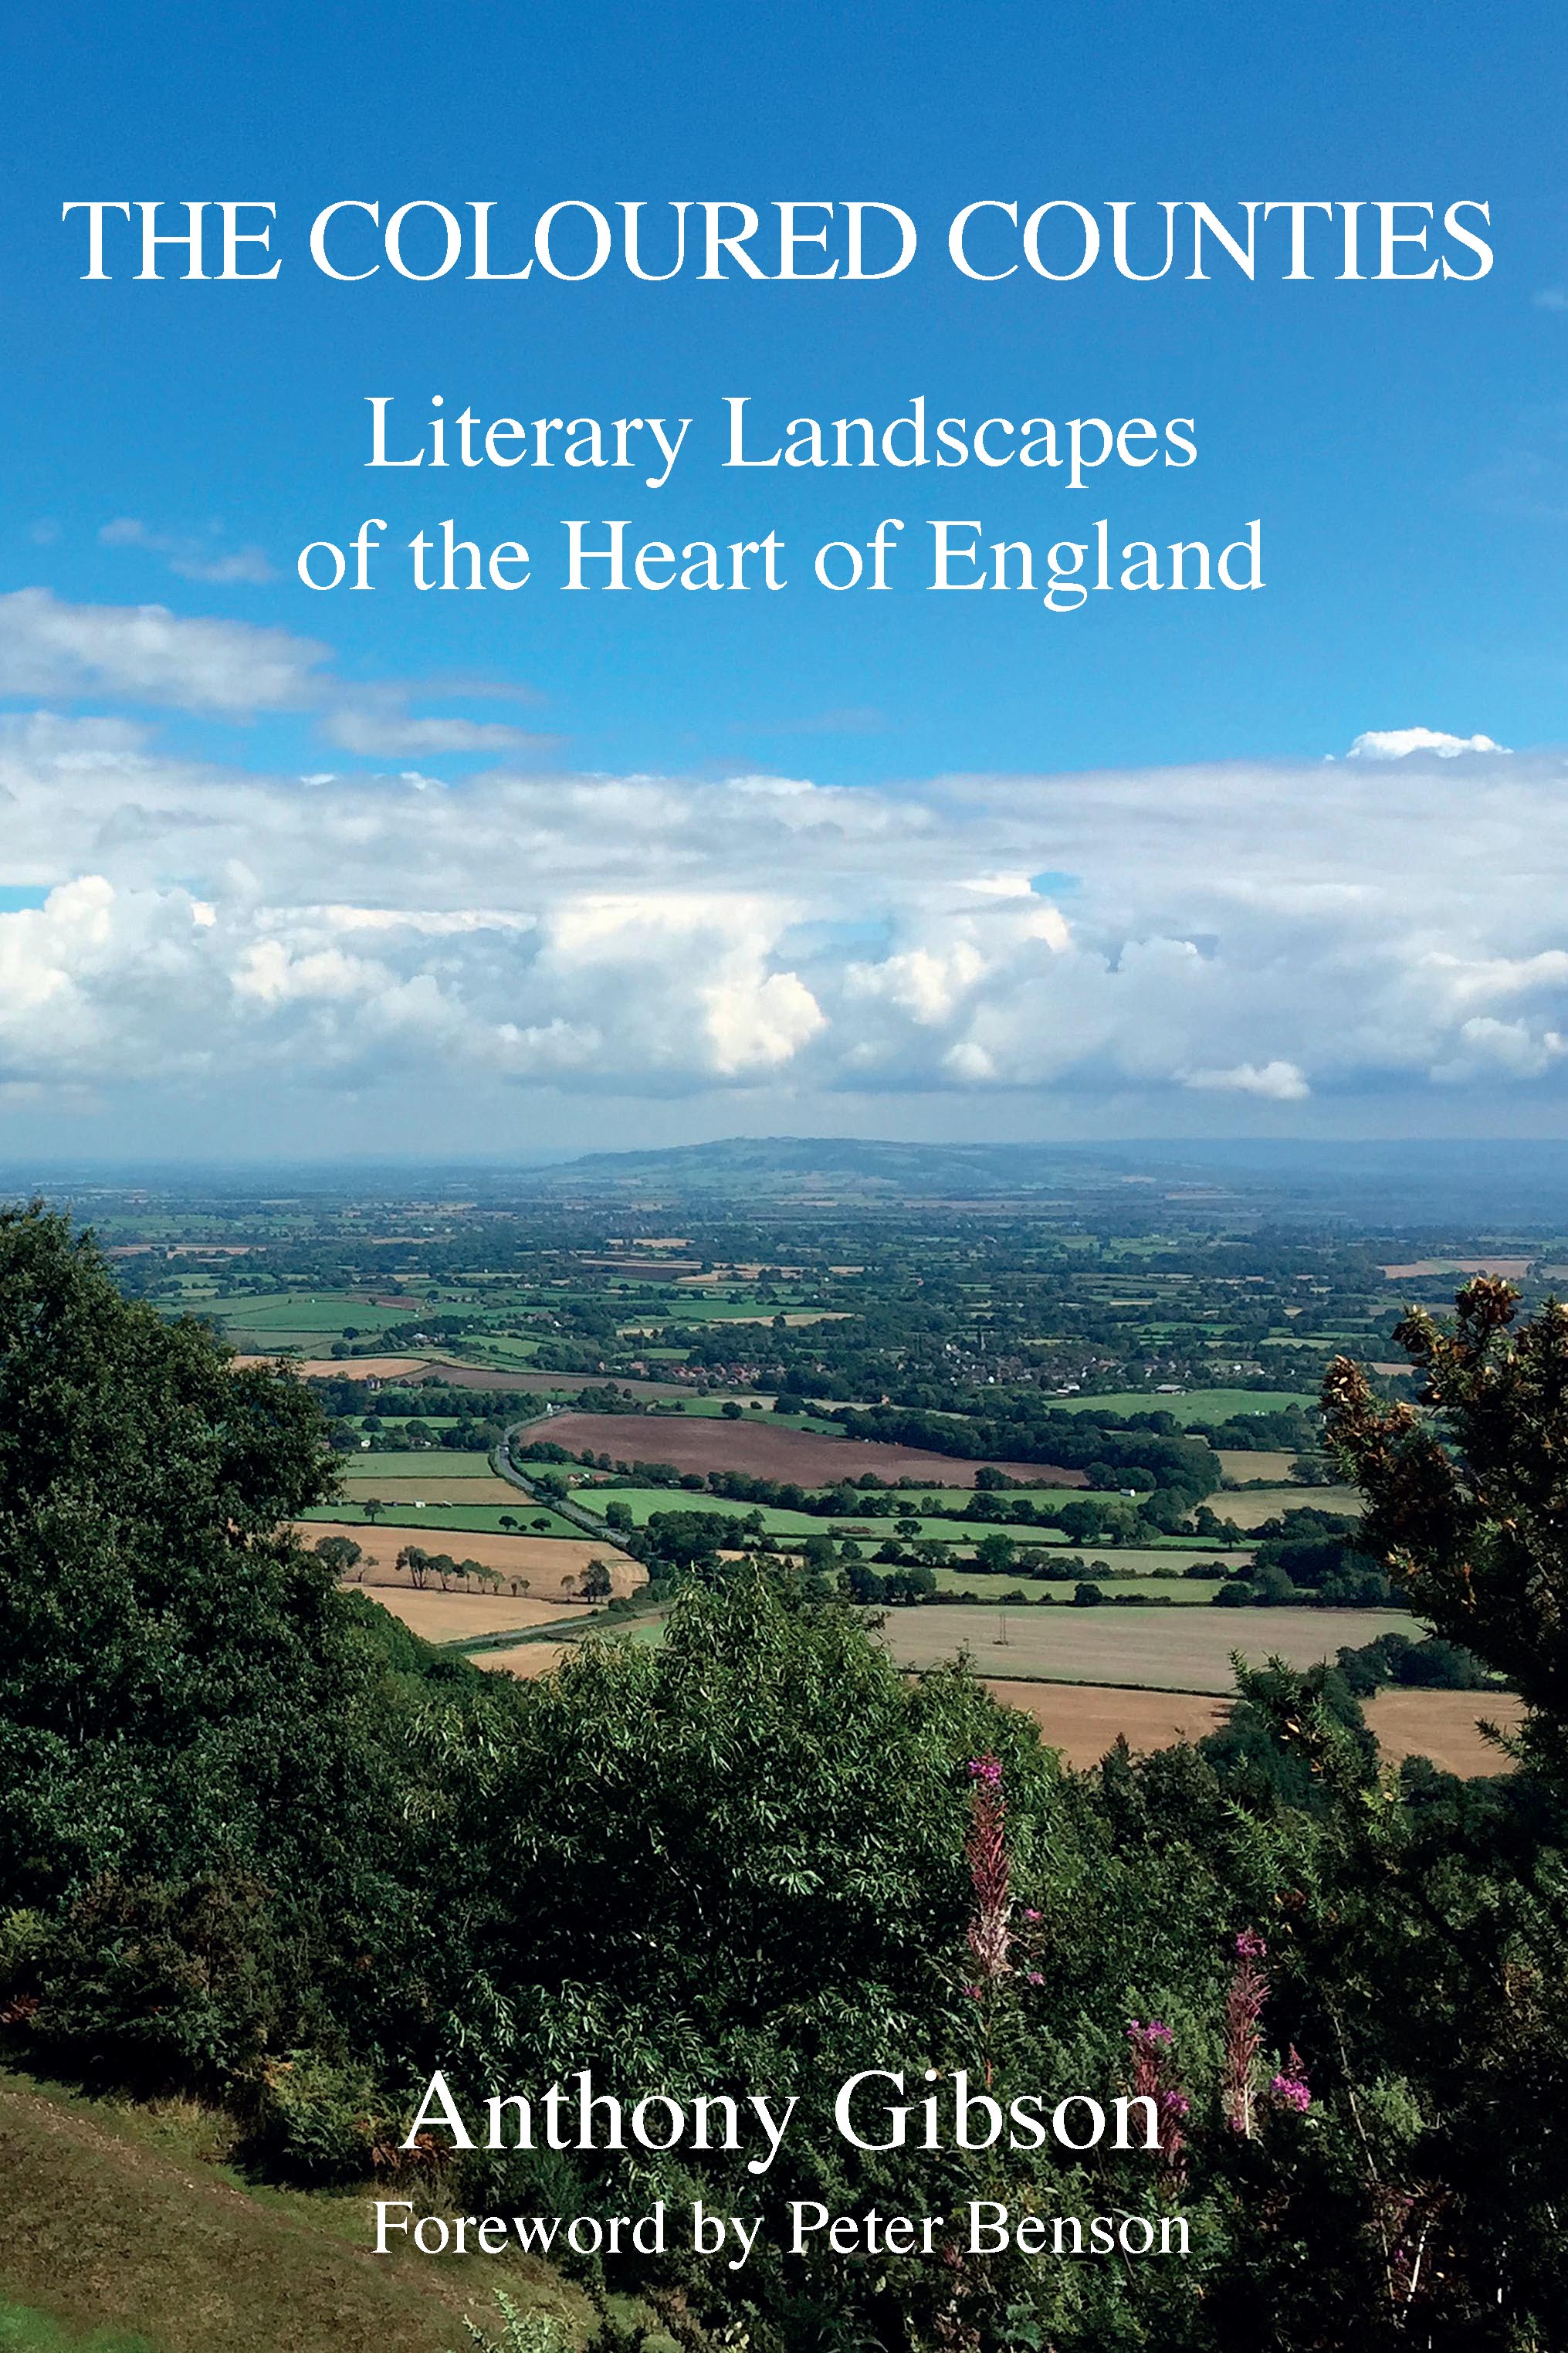 The Coloured Counties – Literary Landscapes of the Heart of England